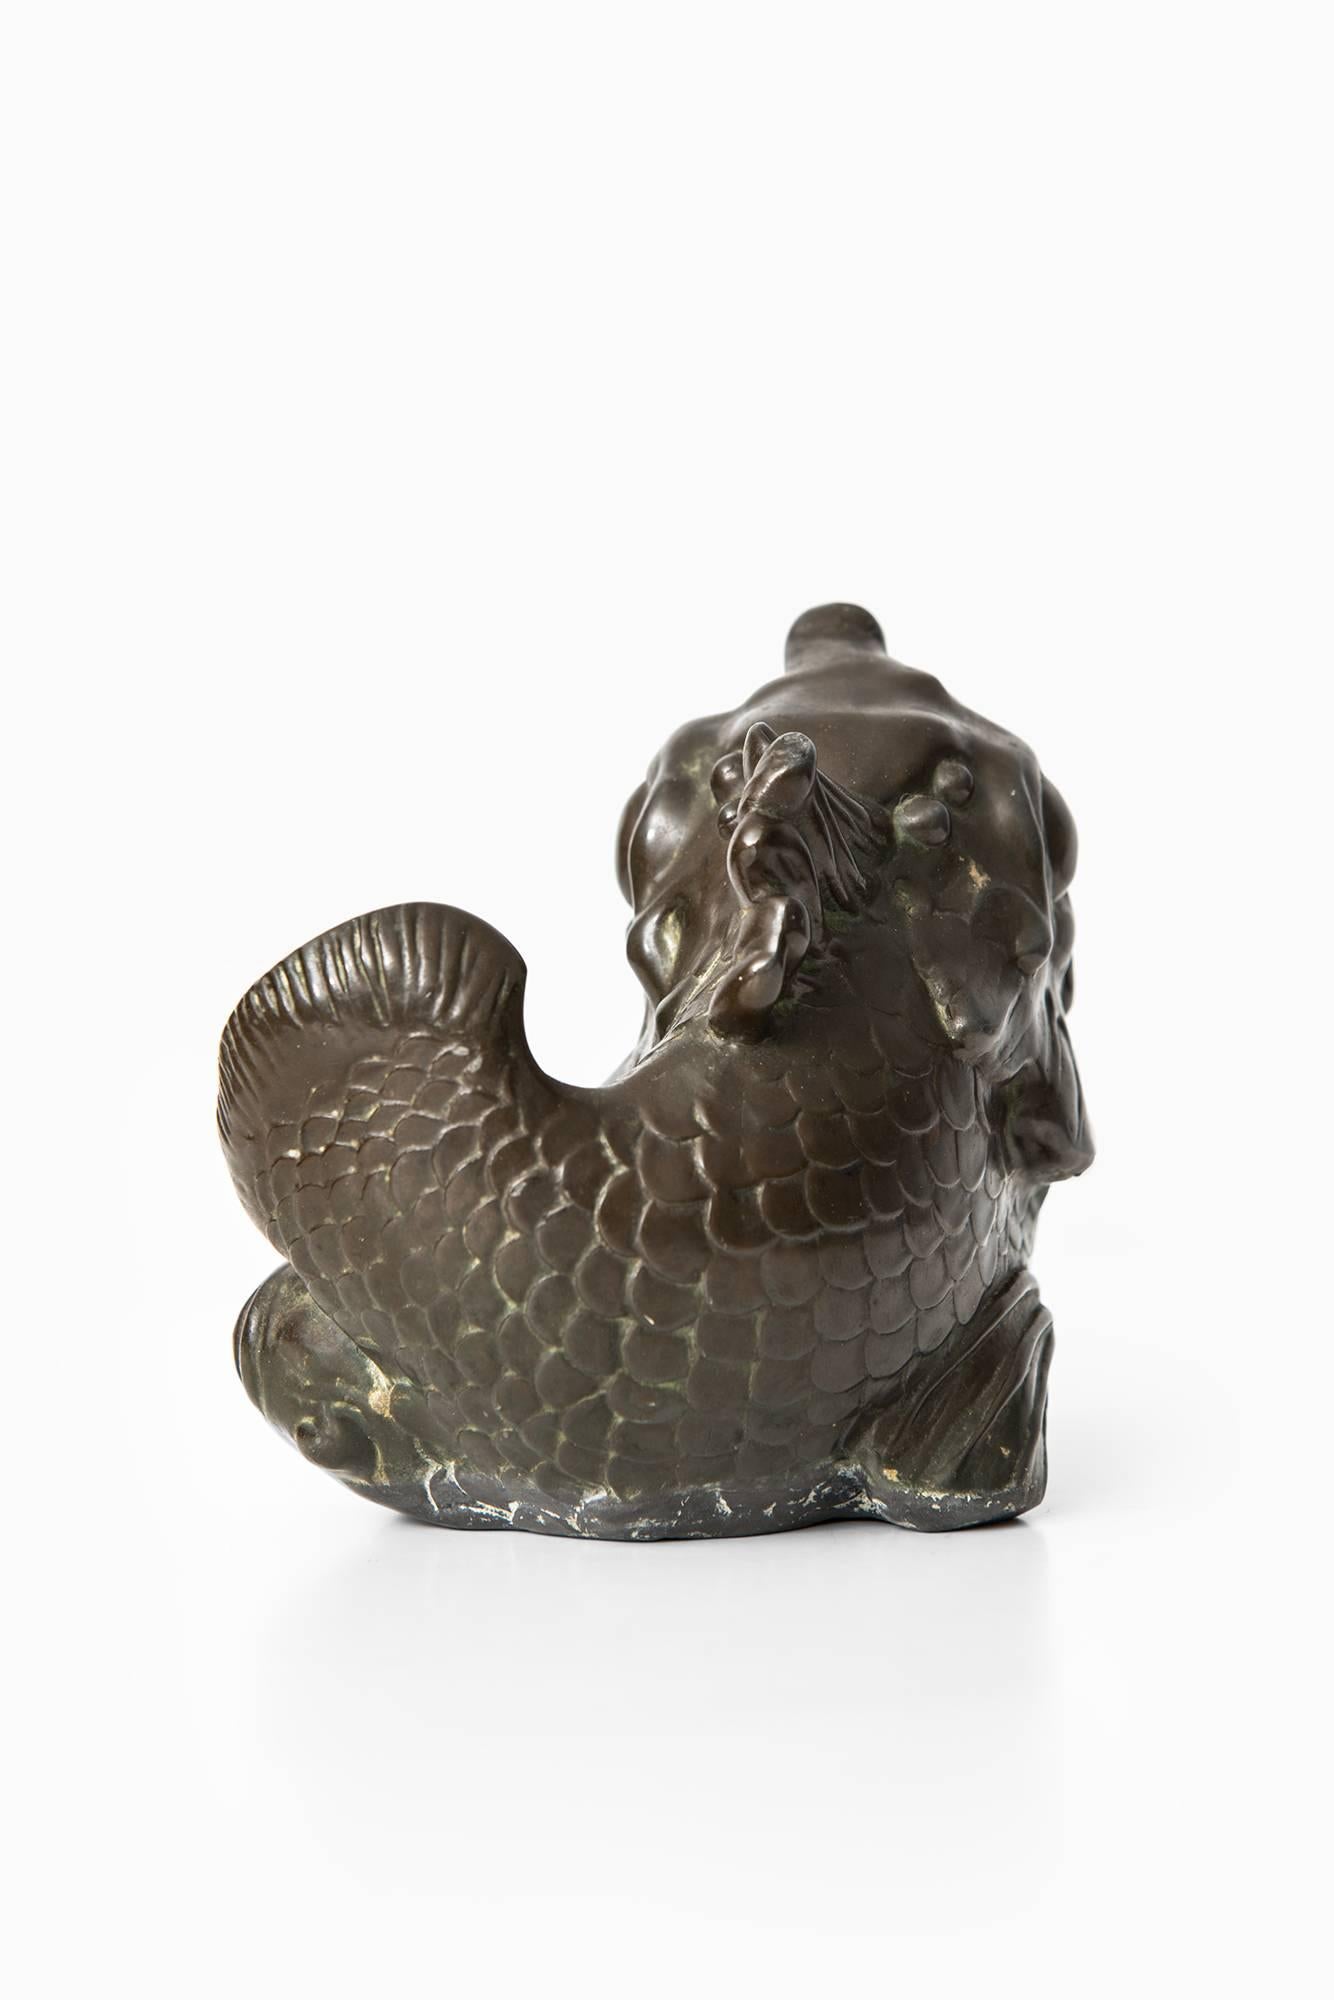 Rare carp fish sculpture by Just Andersen. Produced by Just Andersen in Denmark.